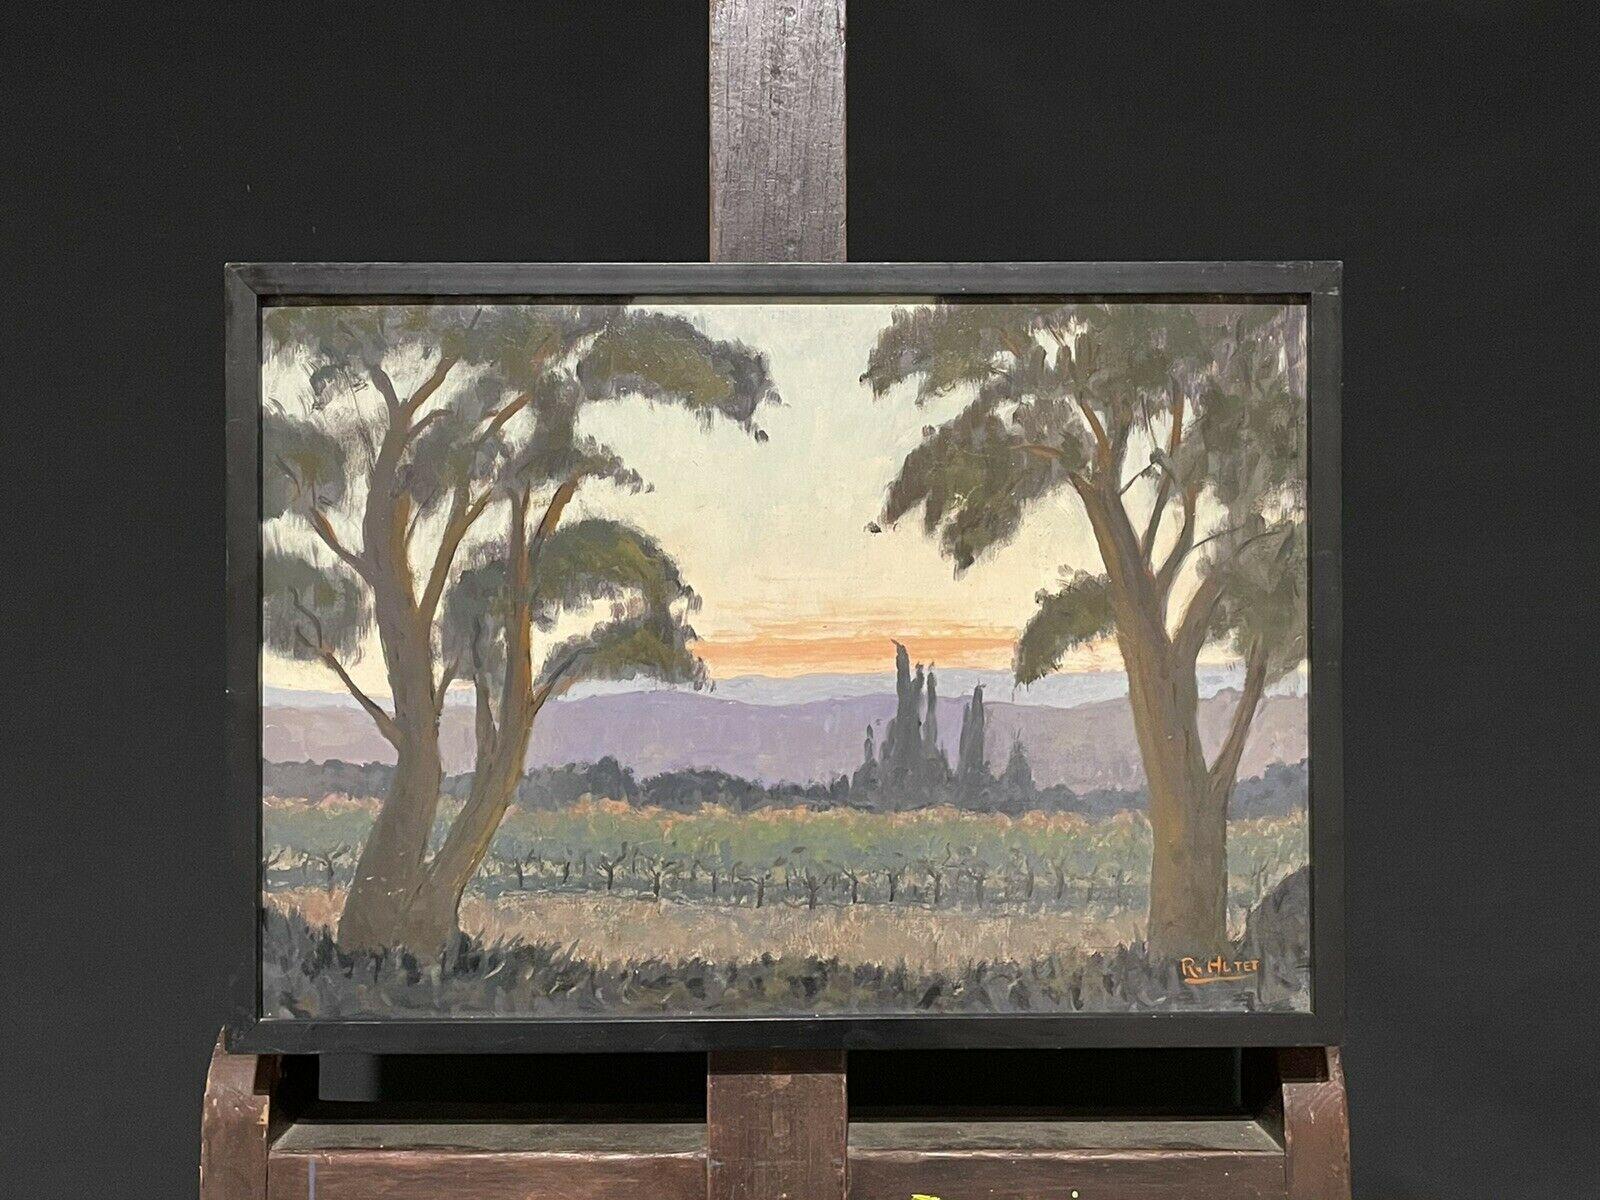 RENE HUTET (1907-1994) LARGE FRENCH IMPRESSIONIST OIL - SUNSET PROVENCE FIELDS - Painting by Rene Hutet